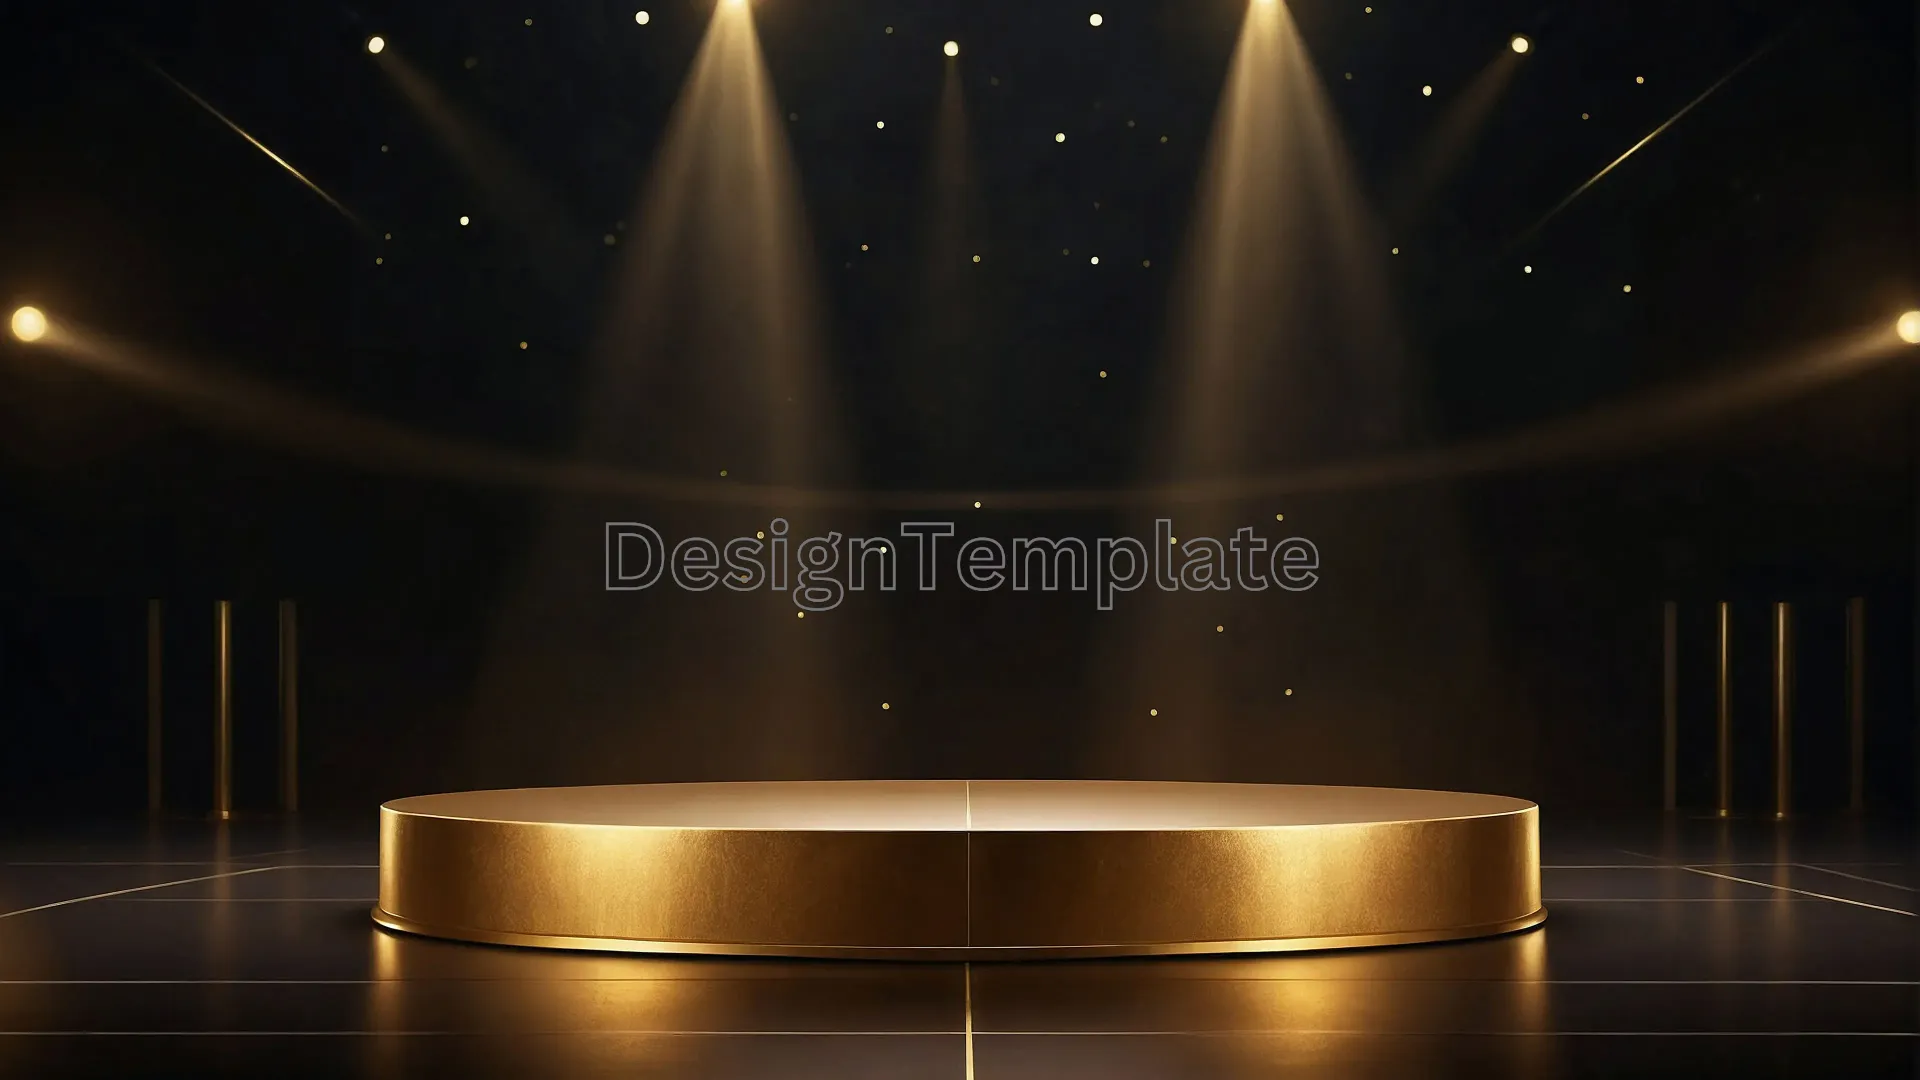 Gold Podium Texture Circular Podium in the Middle on a Dark Background Image image